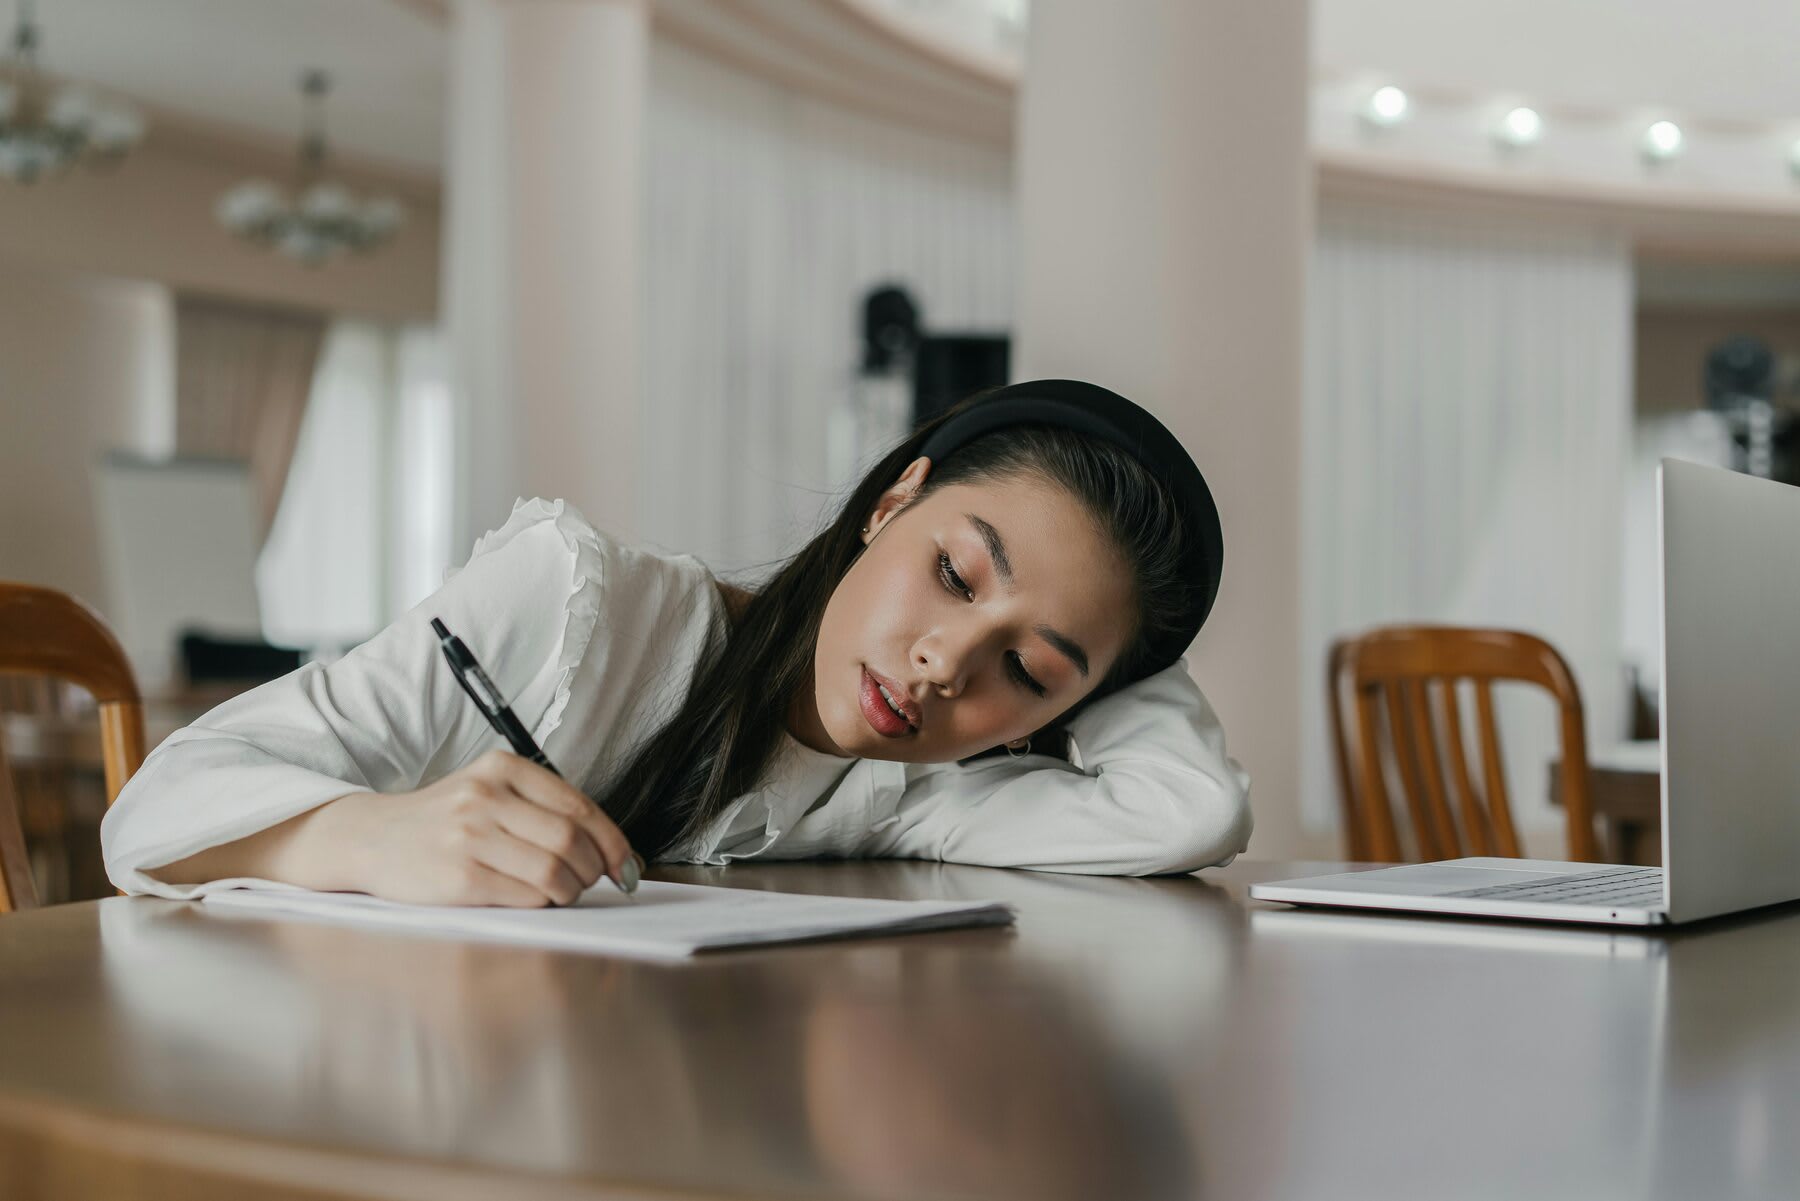 Woman writing notes while her head is slumped close to the table